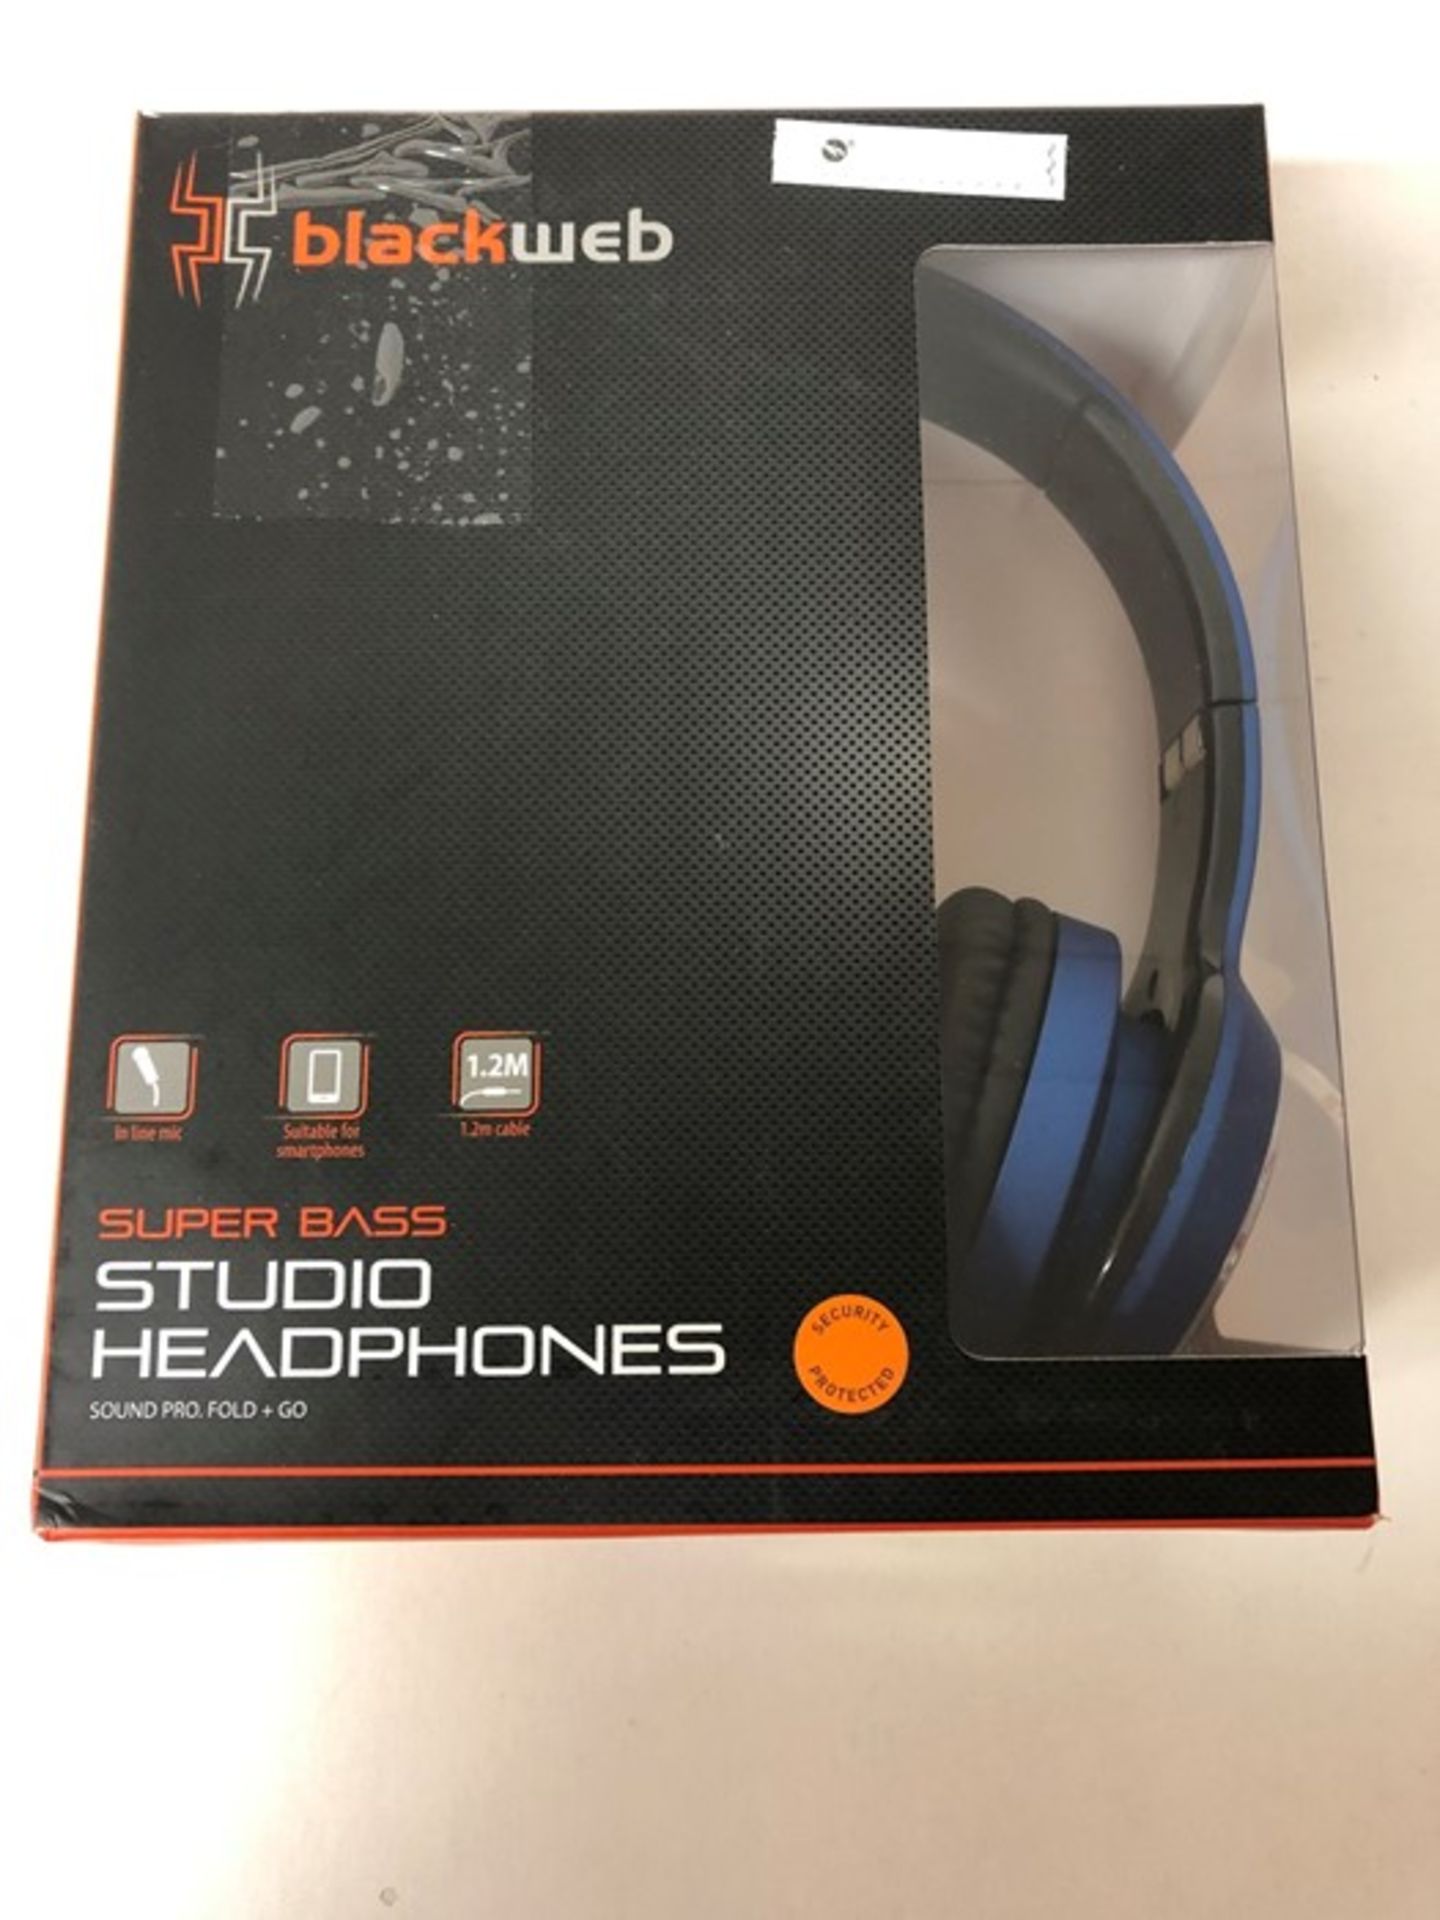 1 BOXED BLACK WEB BLUETOOTH STUDIO HEADPHONES IN BLUE / RRP £20.00 - BL 3809 (VIEWING HIGHLY